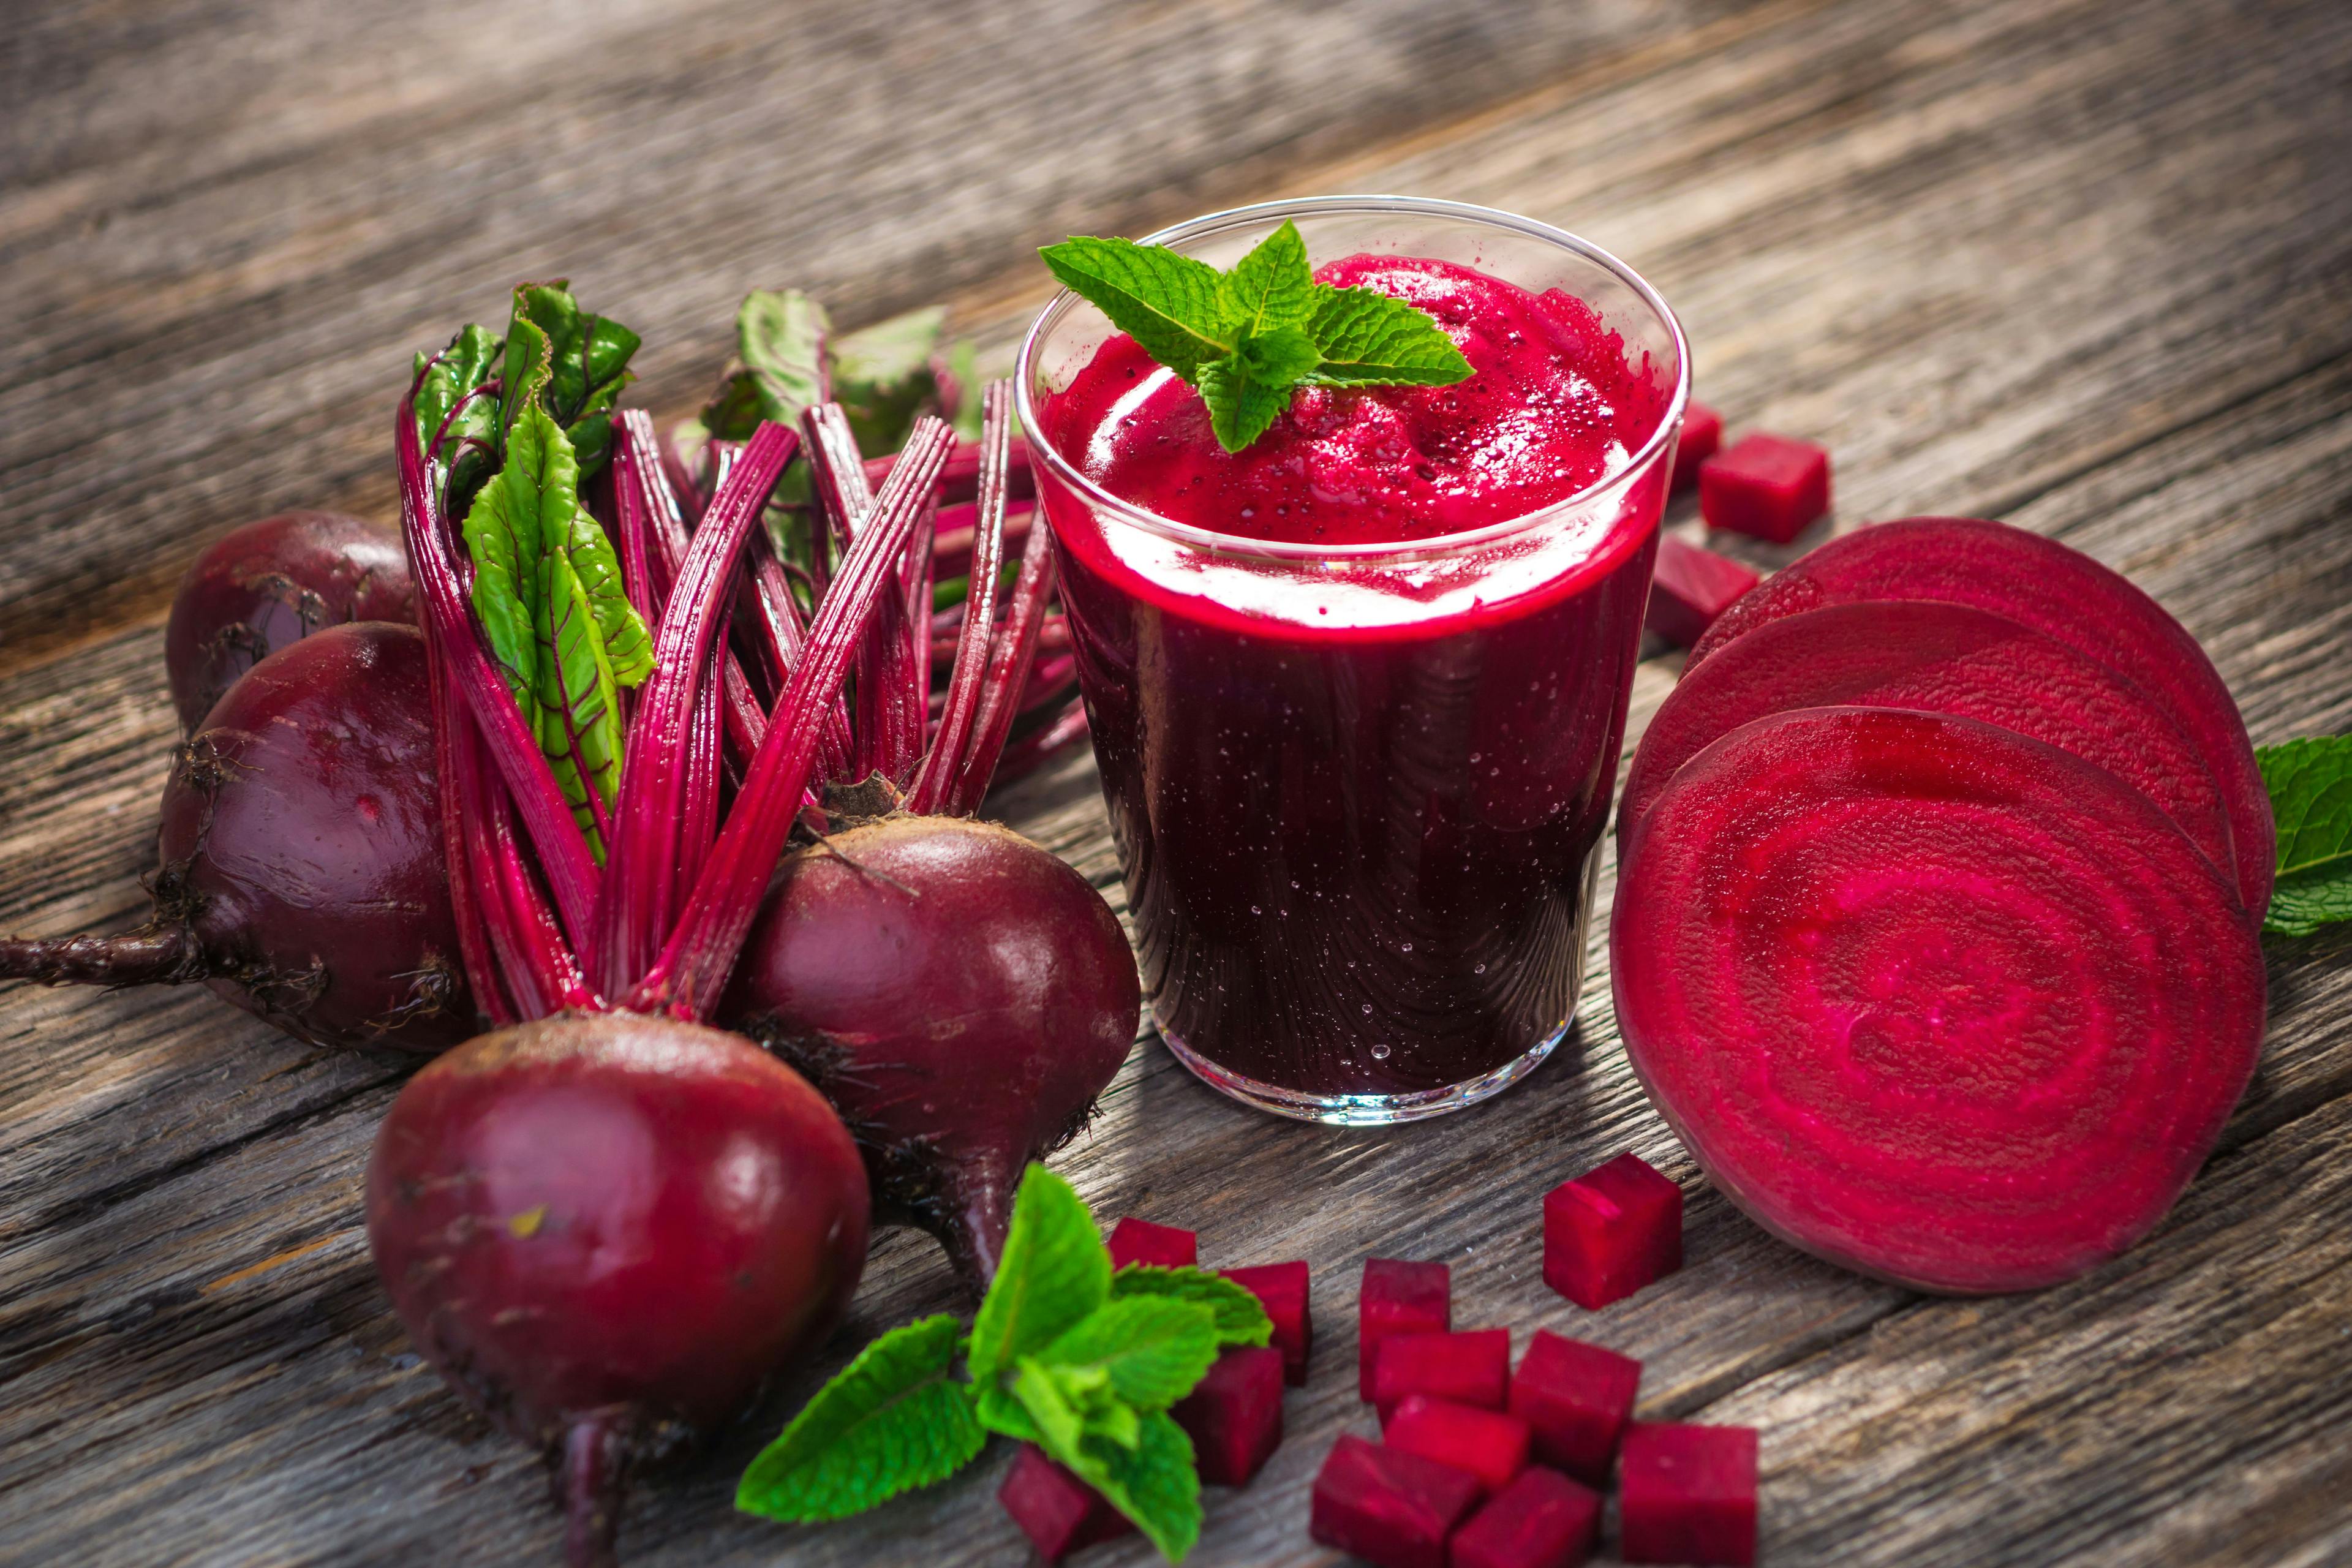 Beetroot Juice Supplement May Be Beneficial for Patients With COPD